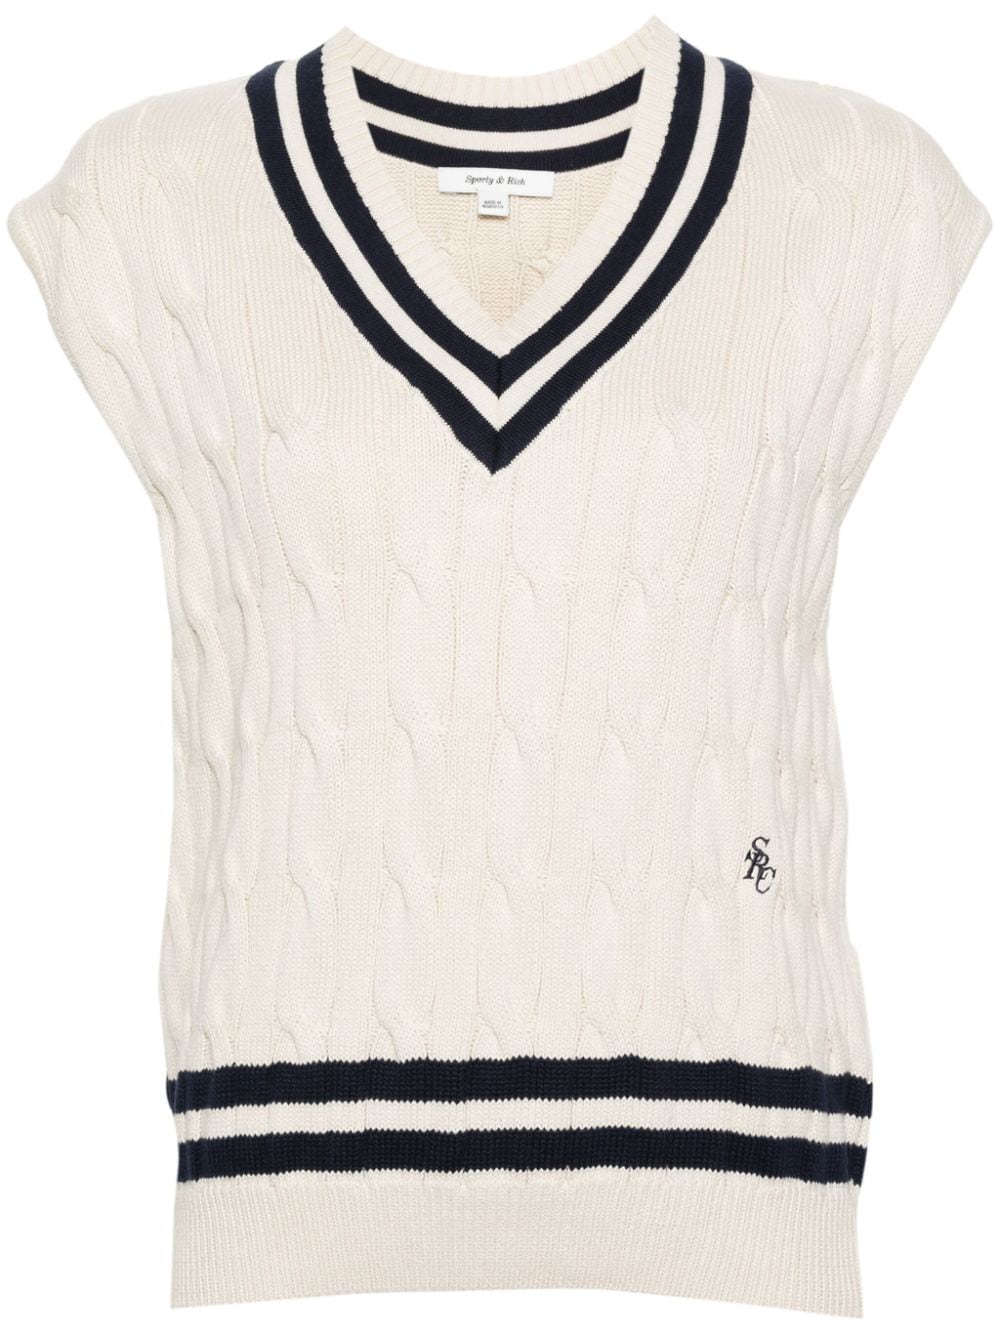 Sporty & Rich cable-knit knitted top - Neutrals von Sporty & Rich